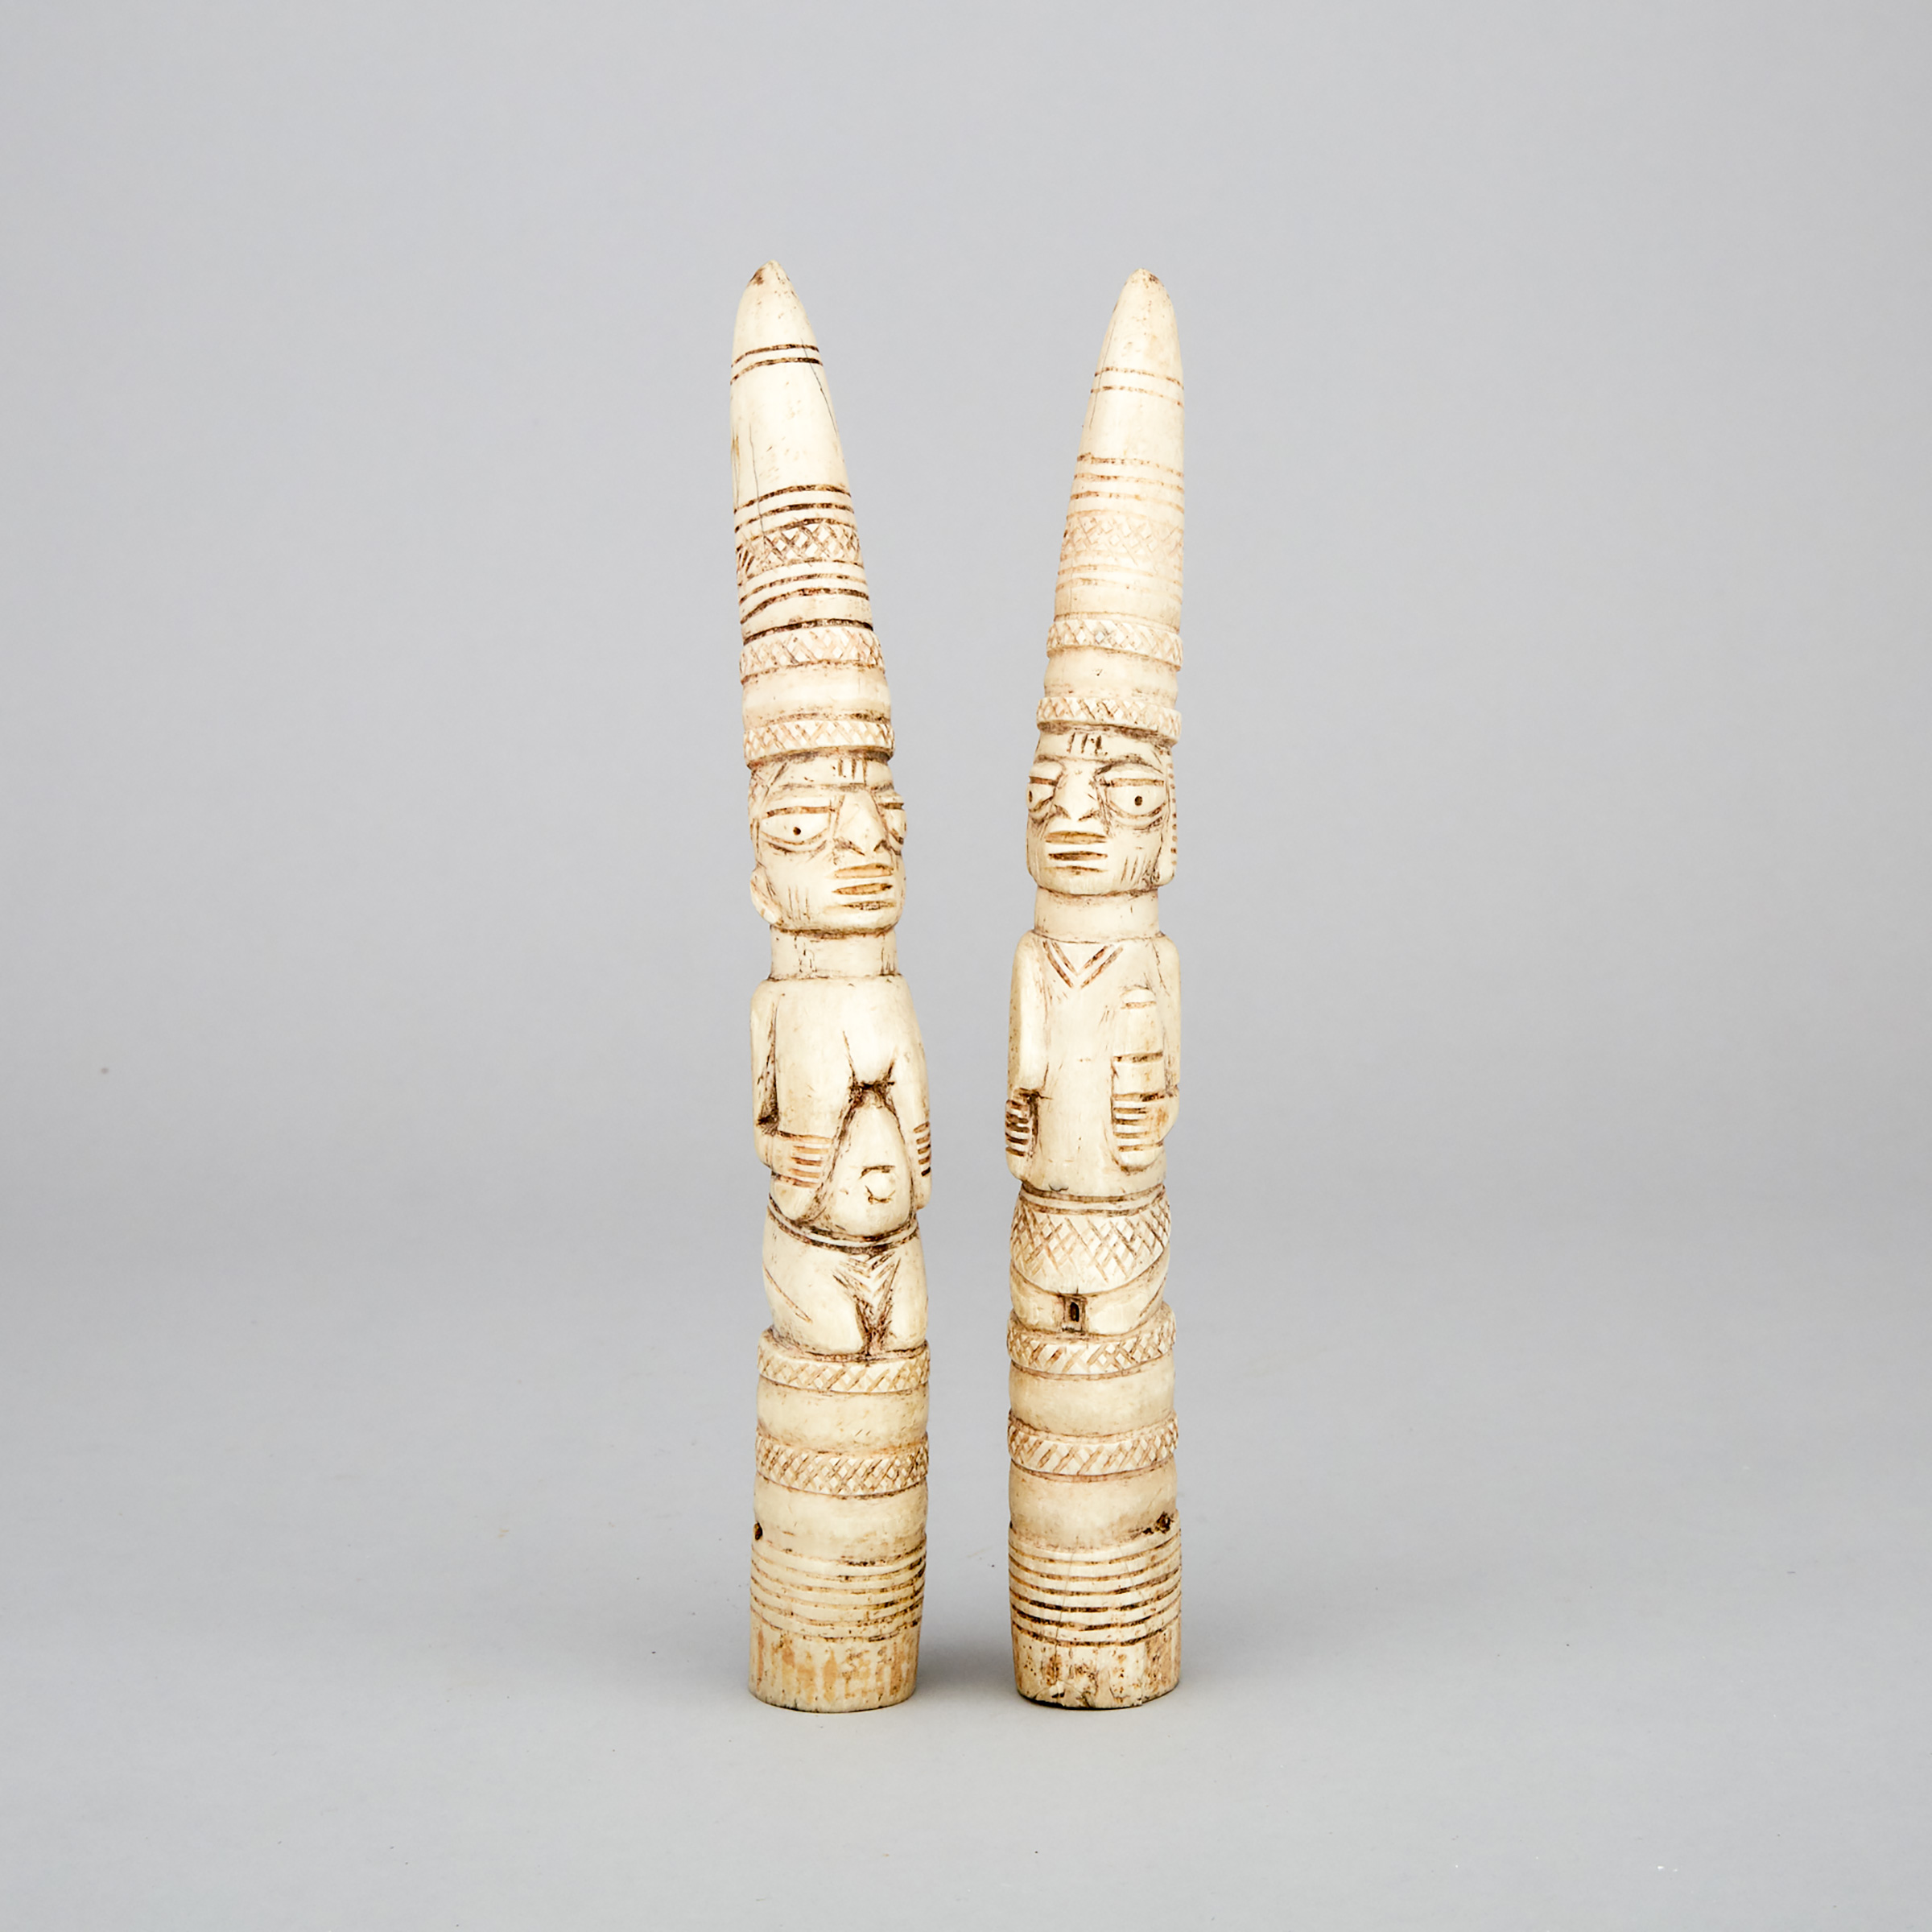 Pair of Yoruba Divination Tappers/Rattles (Iroke Ifa), early 20th century